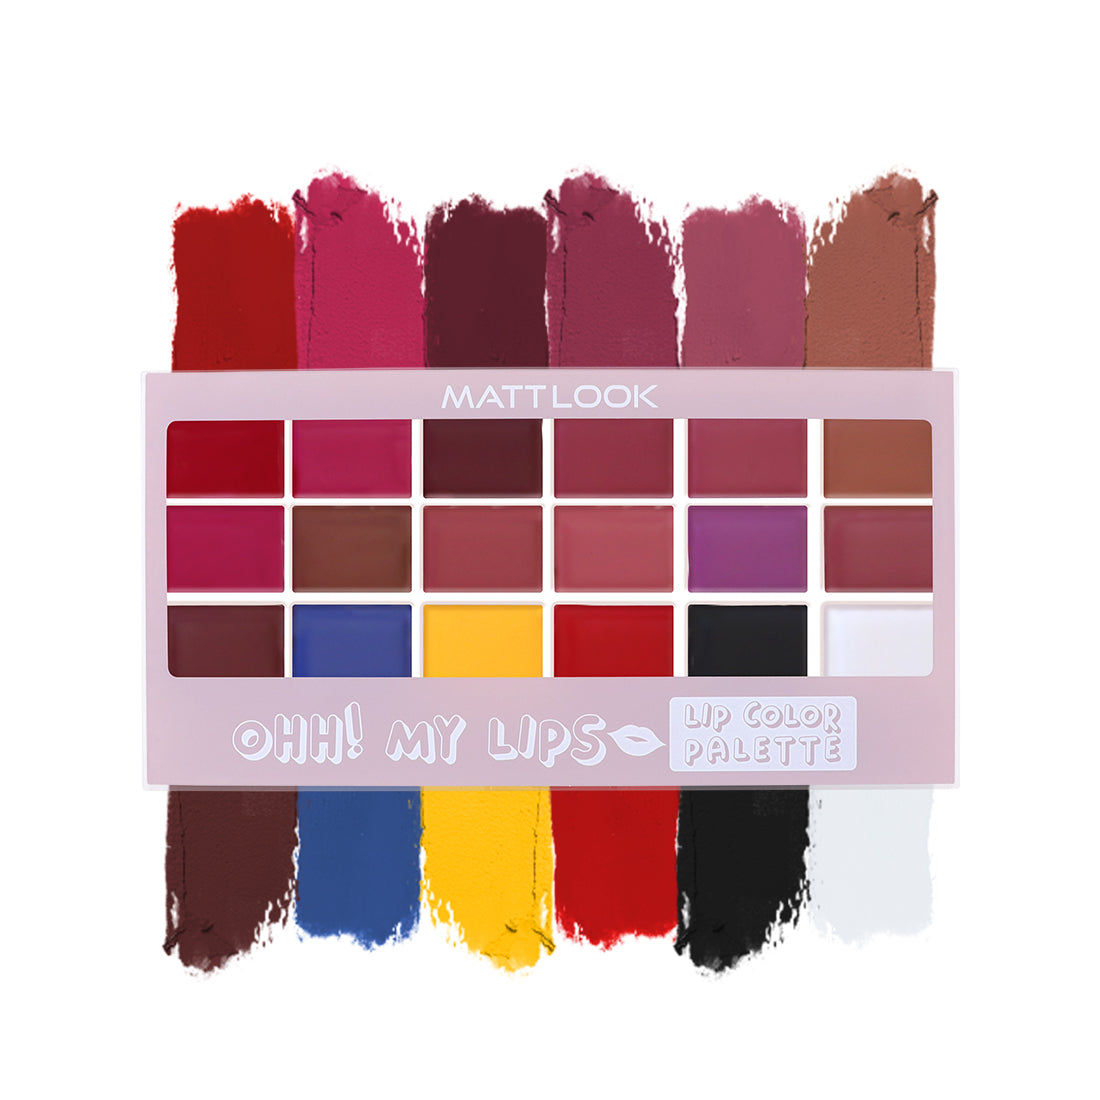 Mattlook My Heart Forever Lip Color Palette, Enriched with Shea butter and Jojoba oil, Long lasting formula, Silky Matte Application, Non- sticky and Ultra- Light